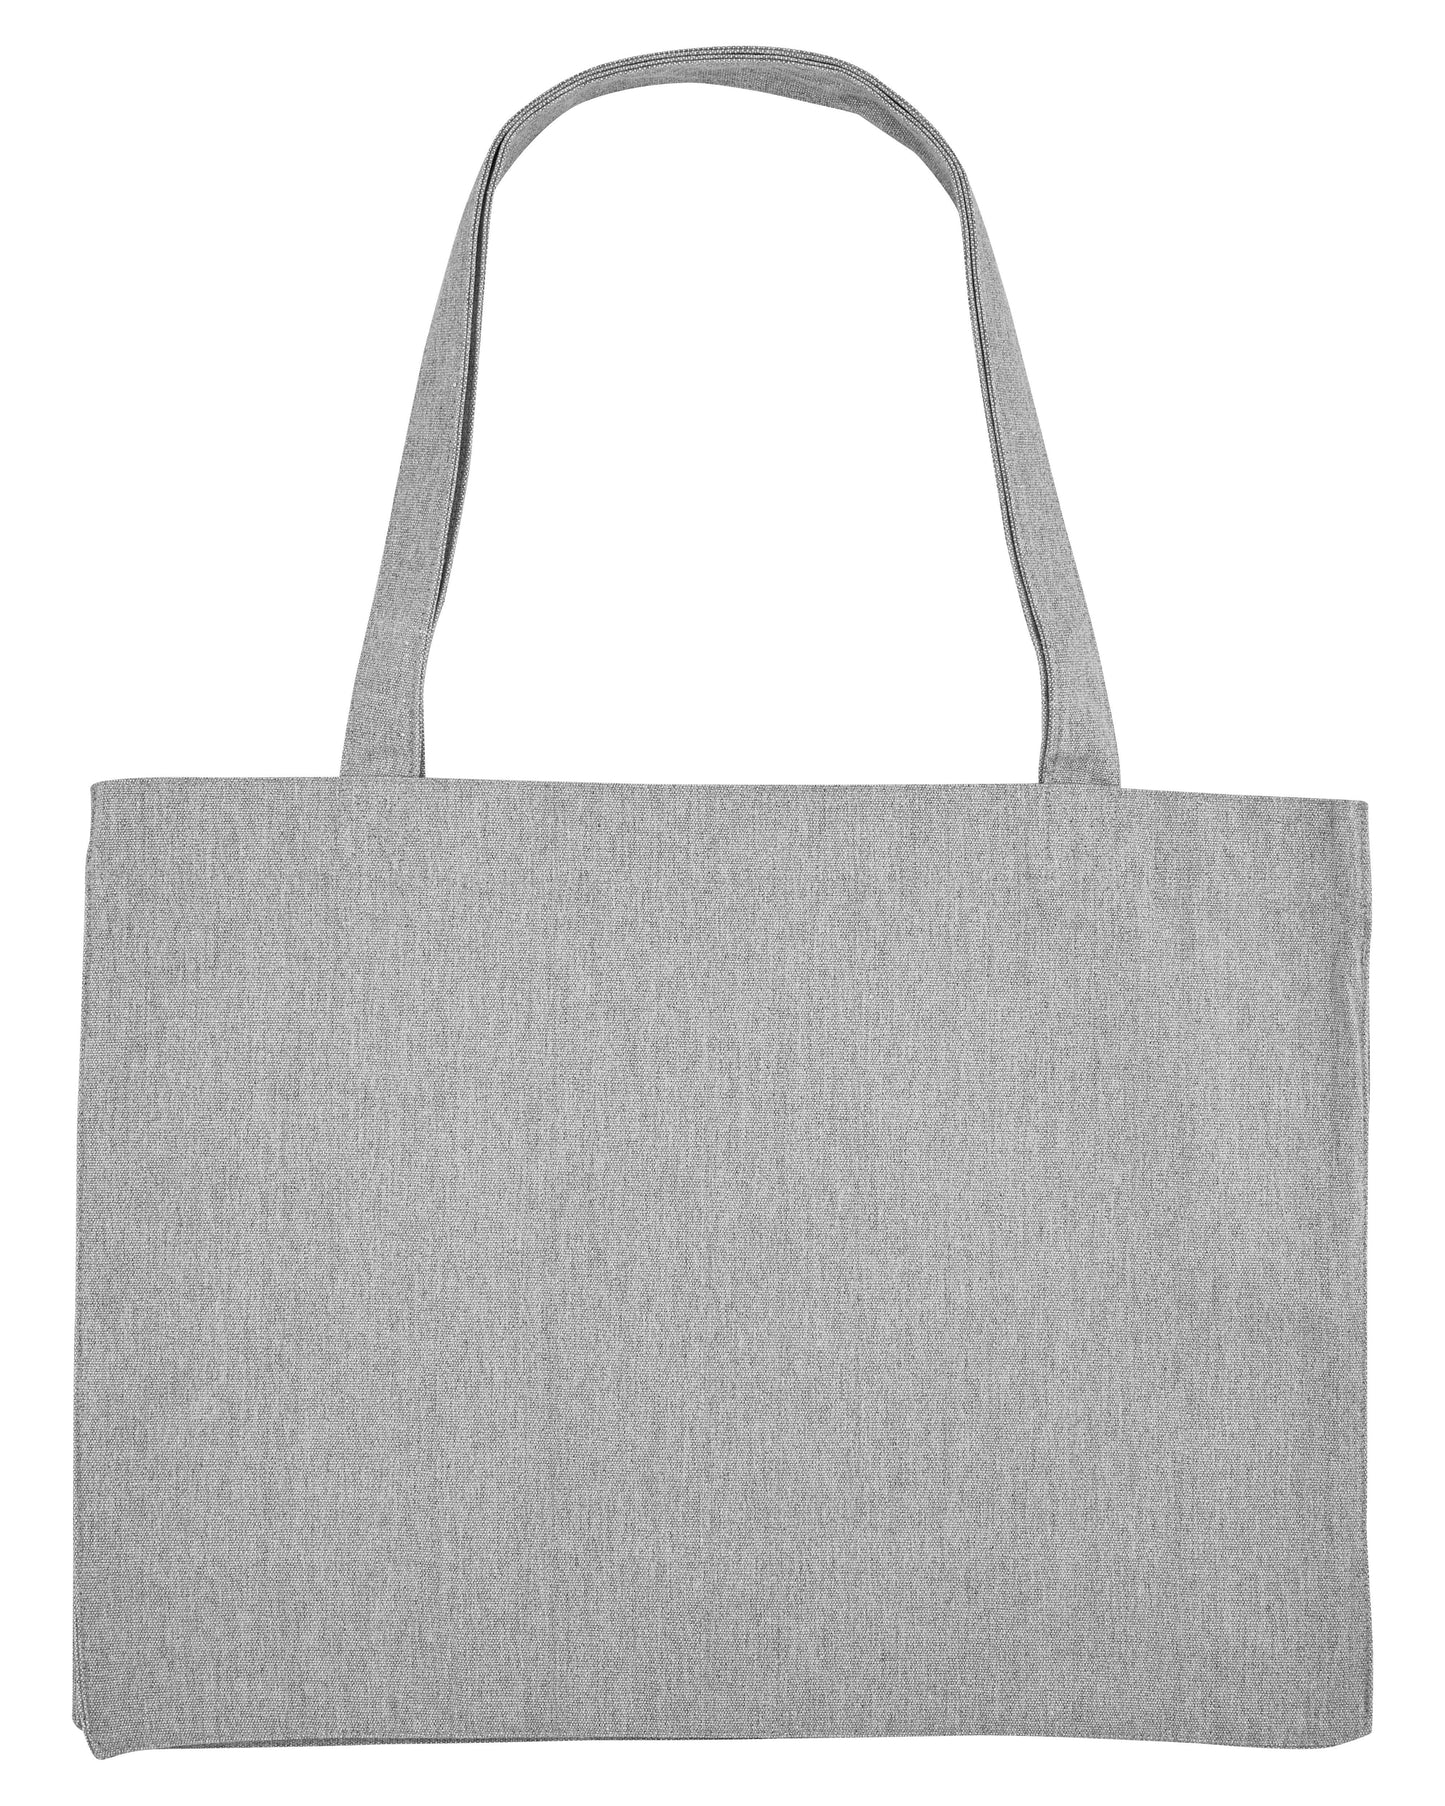 Pink Independent woman lip tote bag in grey